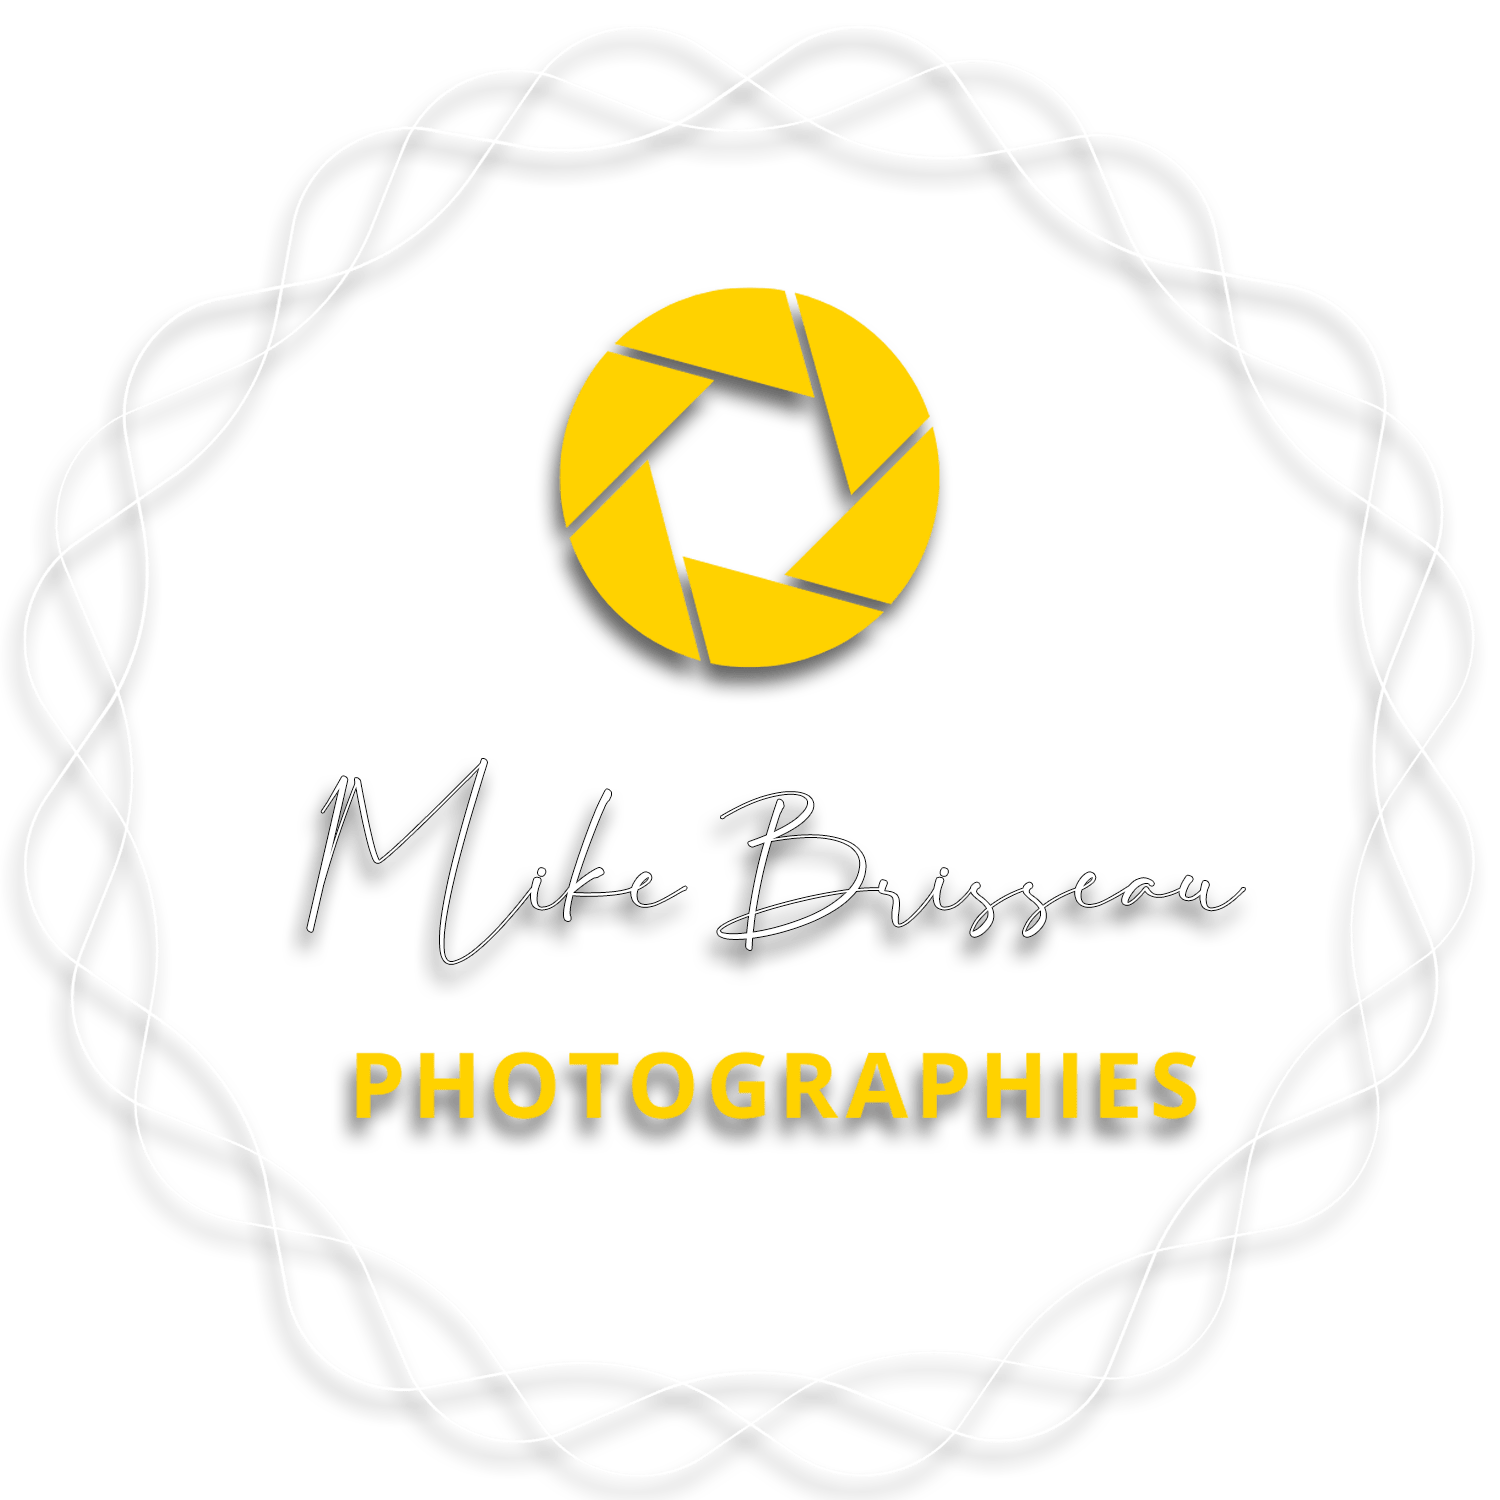 Mike photographies